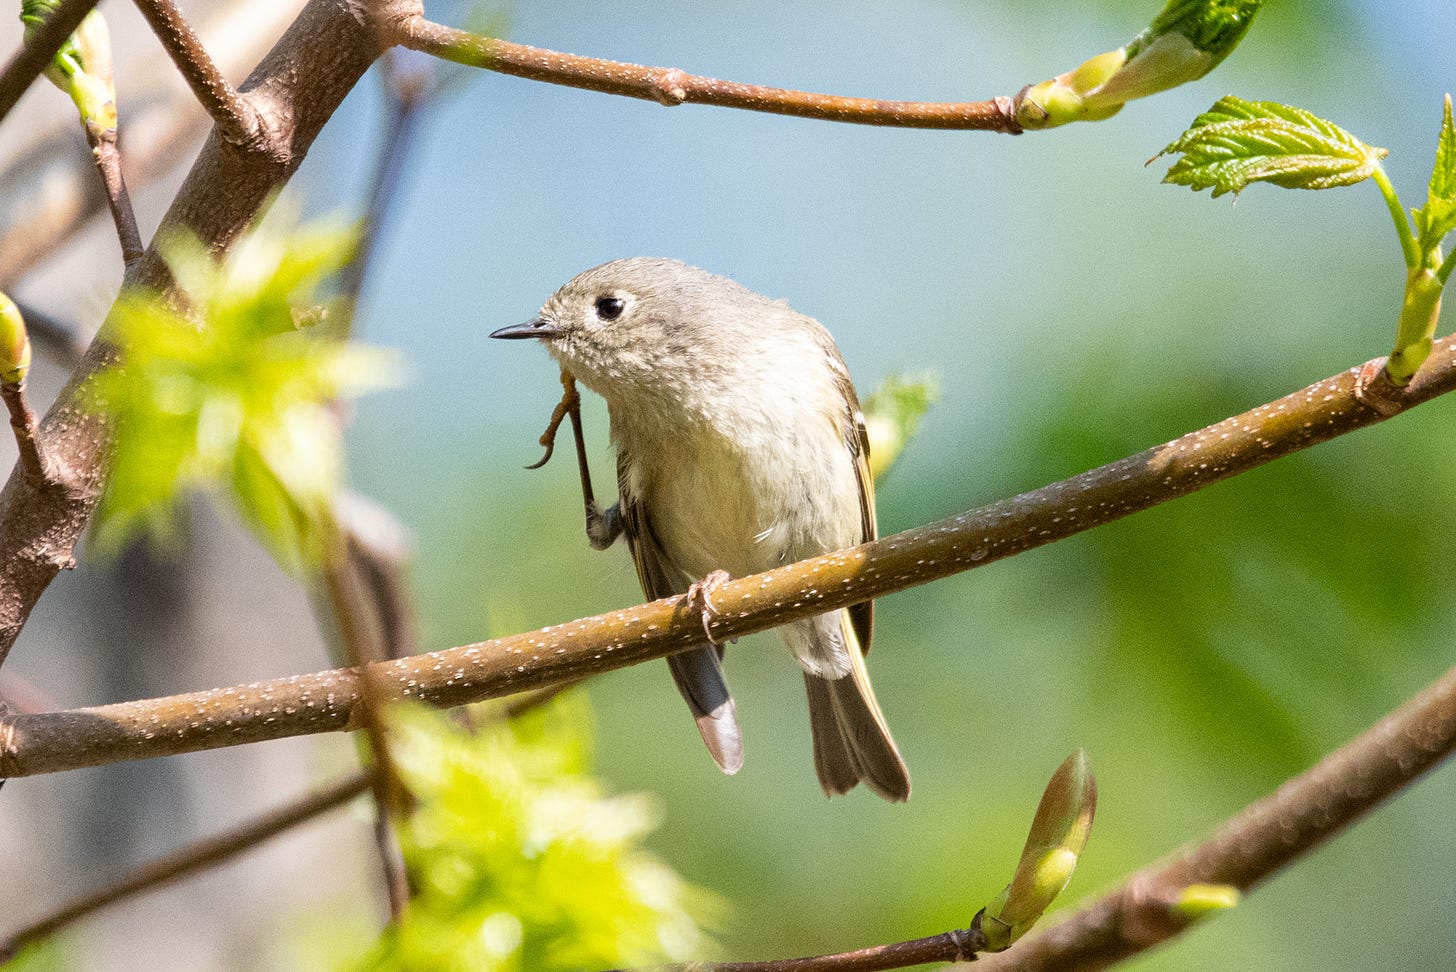 A ruby-crowned kinglet, raising its right claw to scratch the side of its face